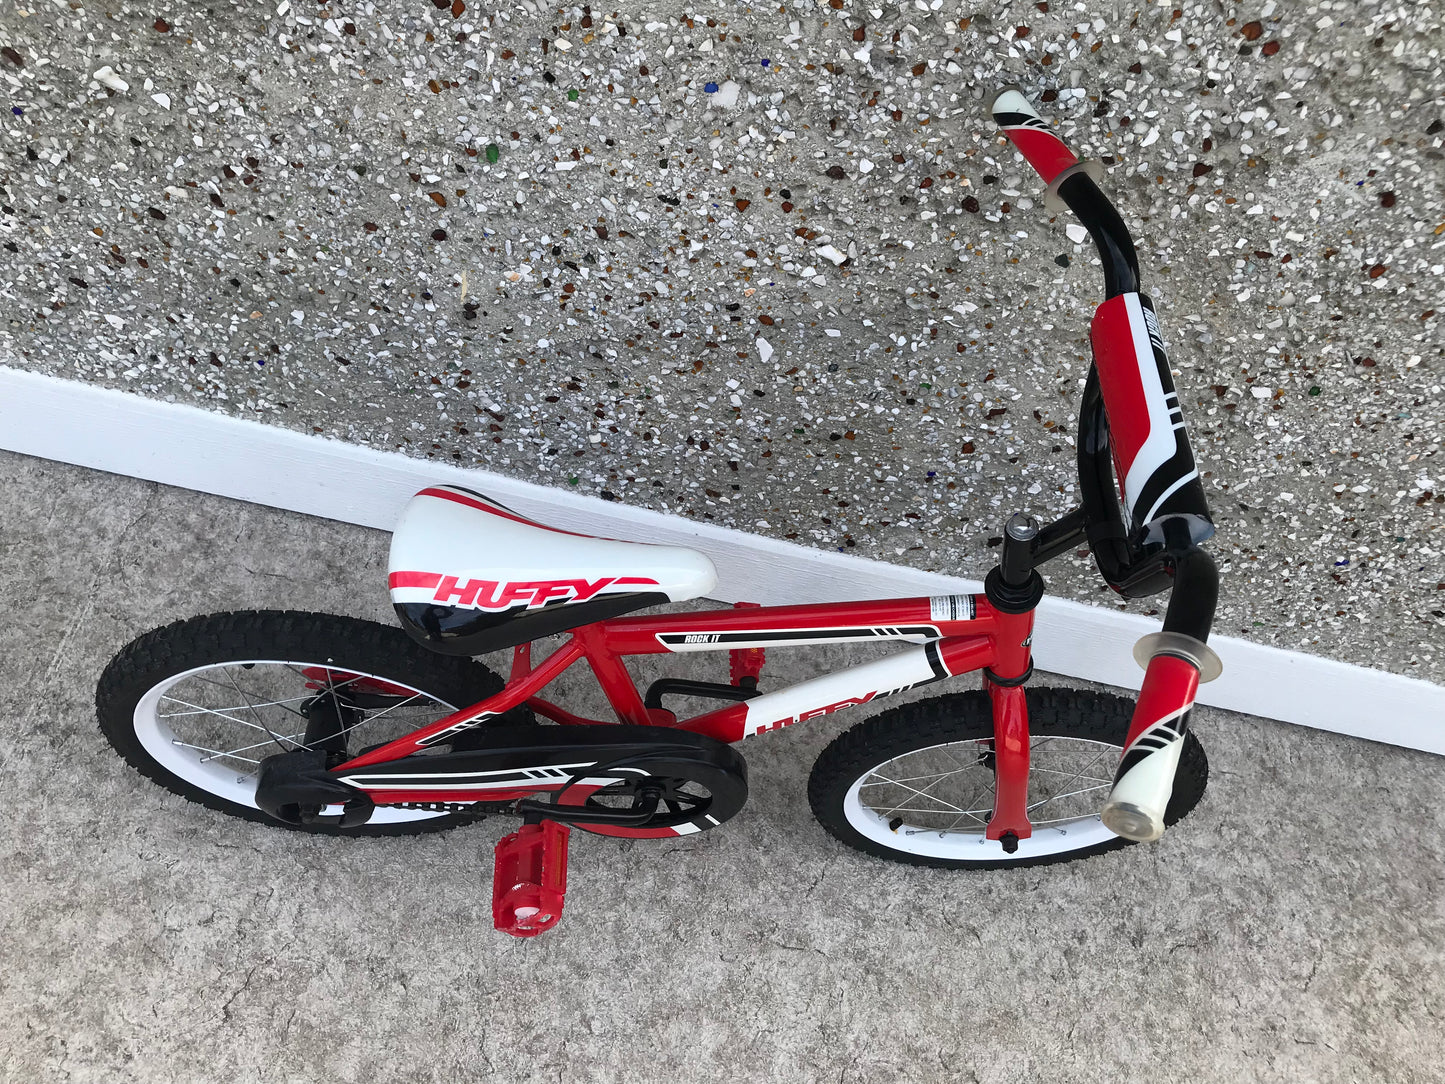 Bike Child Size 16 inch Huffy Red White As New